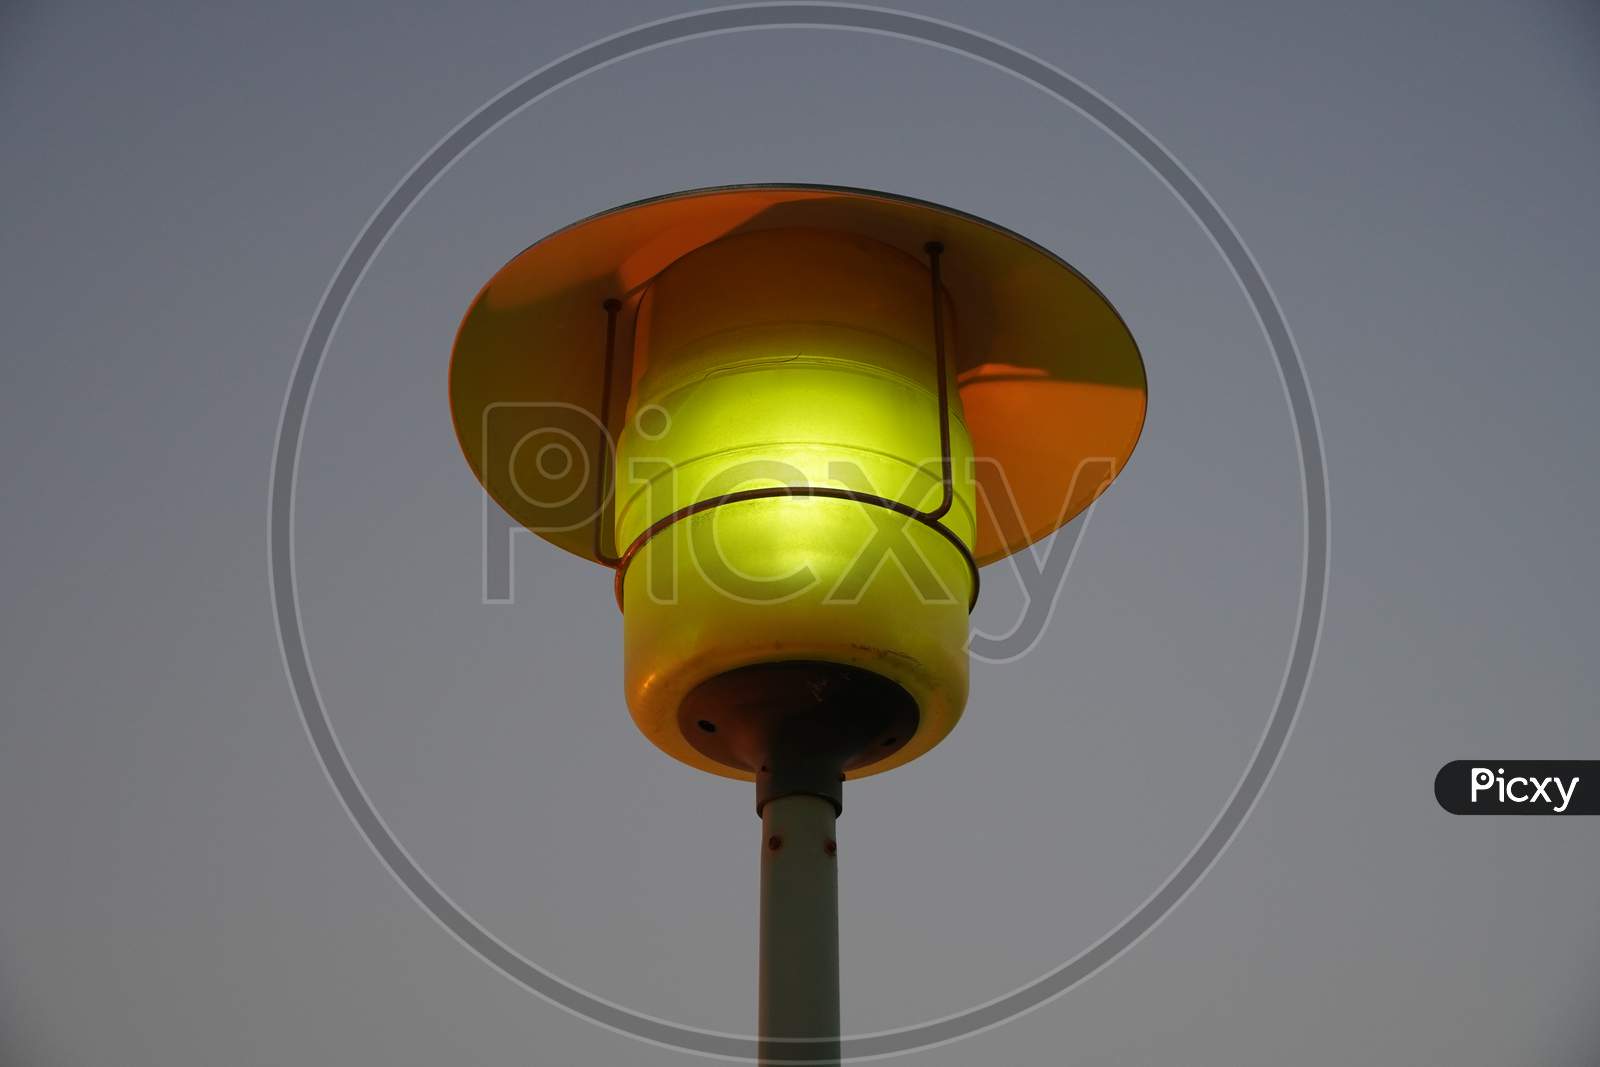 Street Lamp Post With The Evening Skyline View. Outdoor Light Fixture With Sky Background. A Single Hooded Street Light.